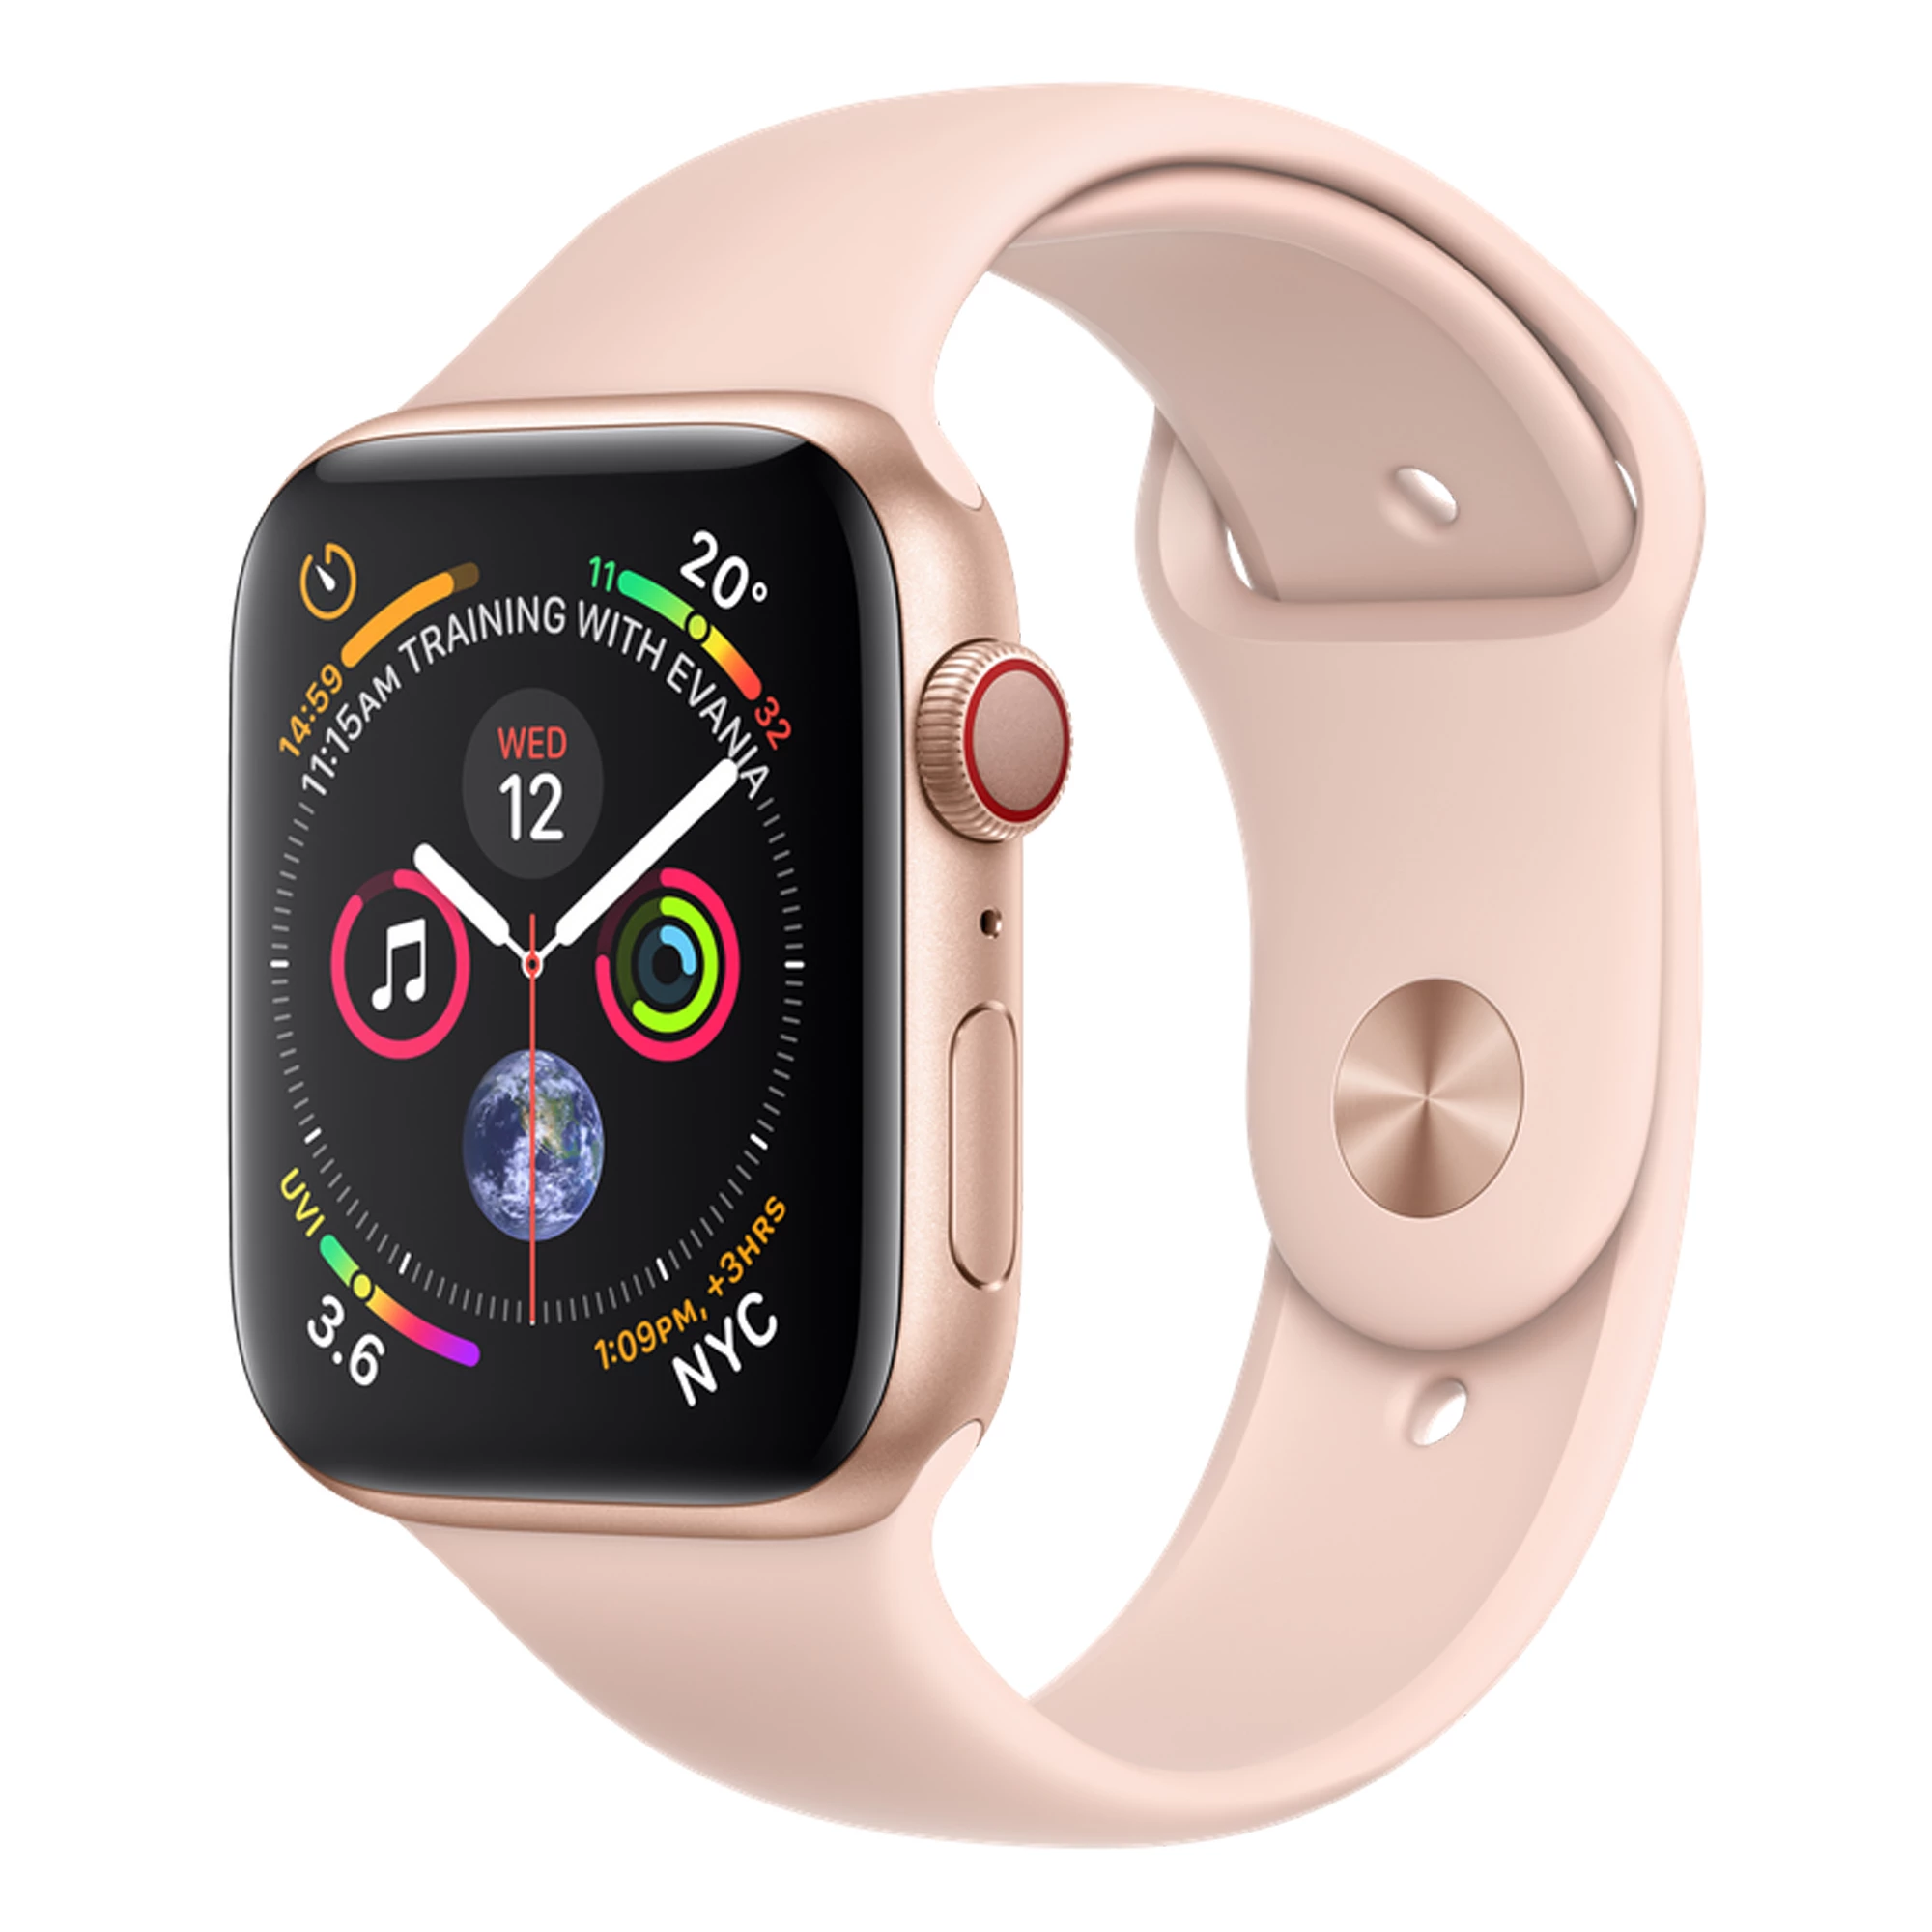 Apple Watch Series 4 (GPS + Cellular) 44mm Gold Aluminum Case with Pink Sand Sport Band (MTV02, MTVW2)